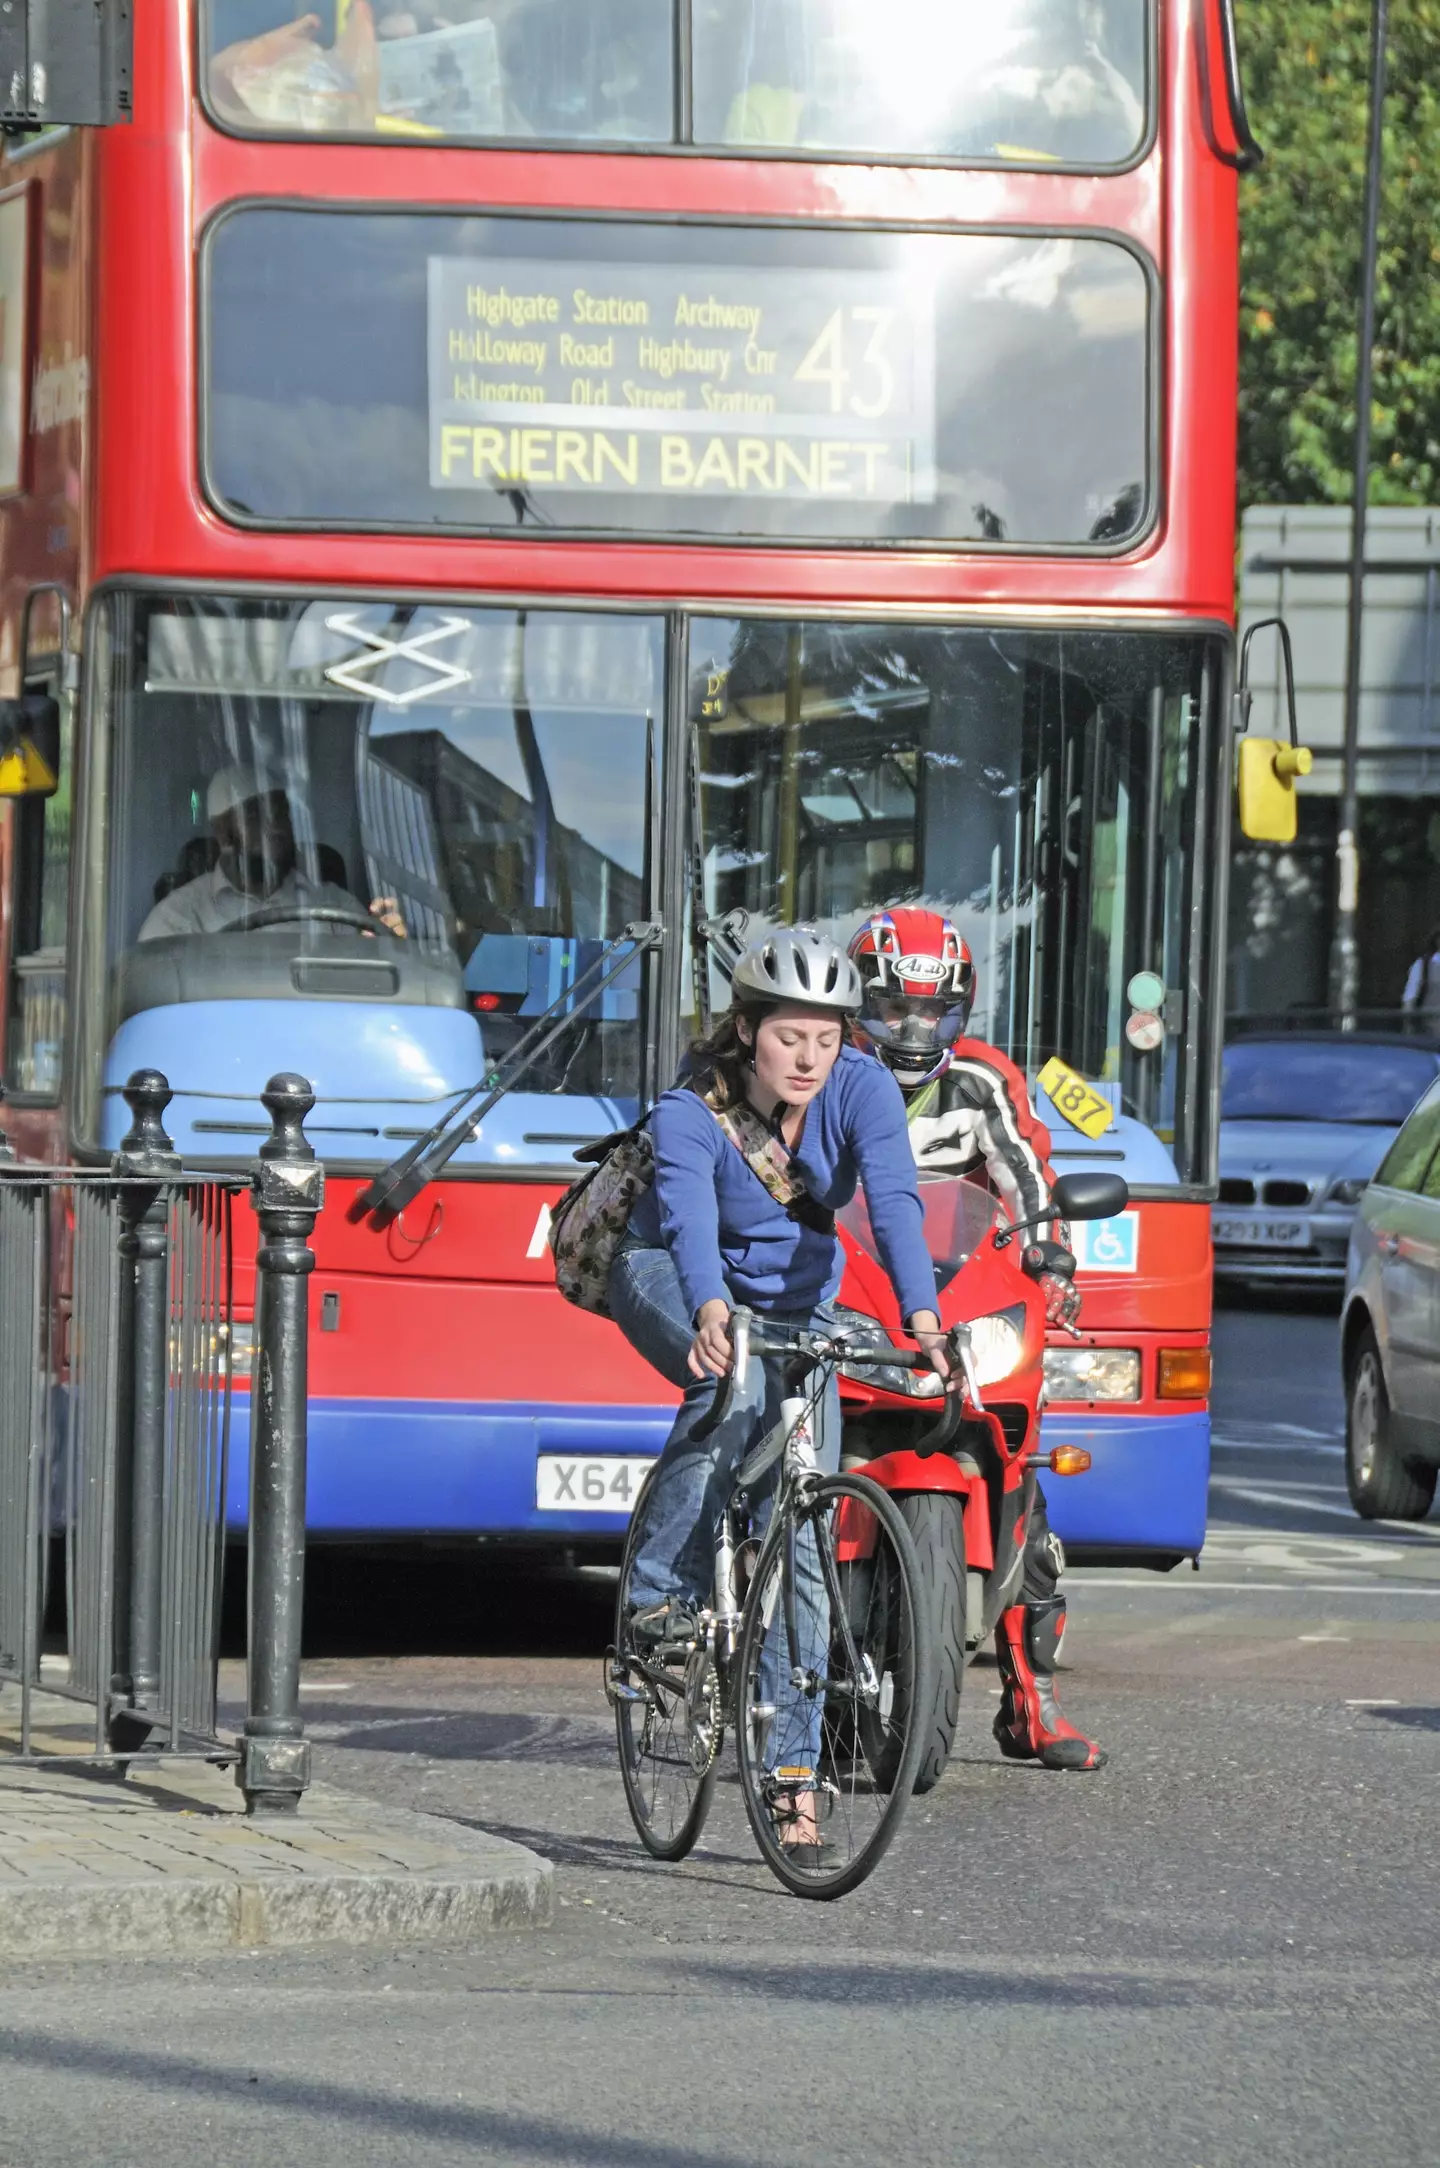 Anyone who commutes by bike will know how unnerving it is when a double-decker whooshes by.